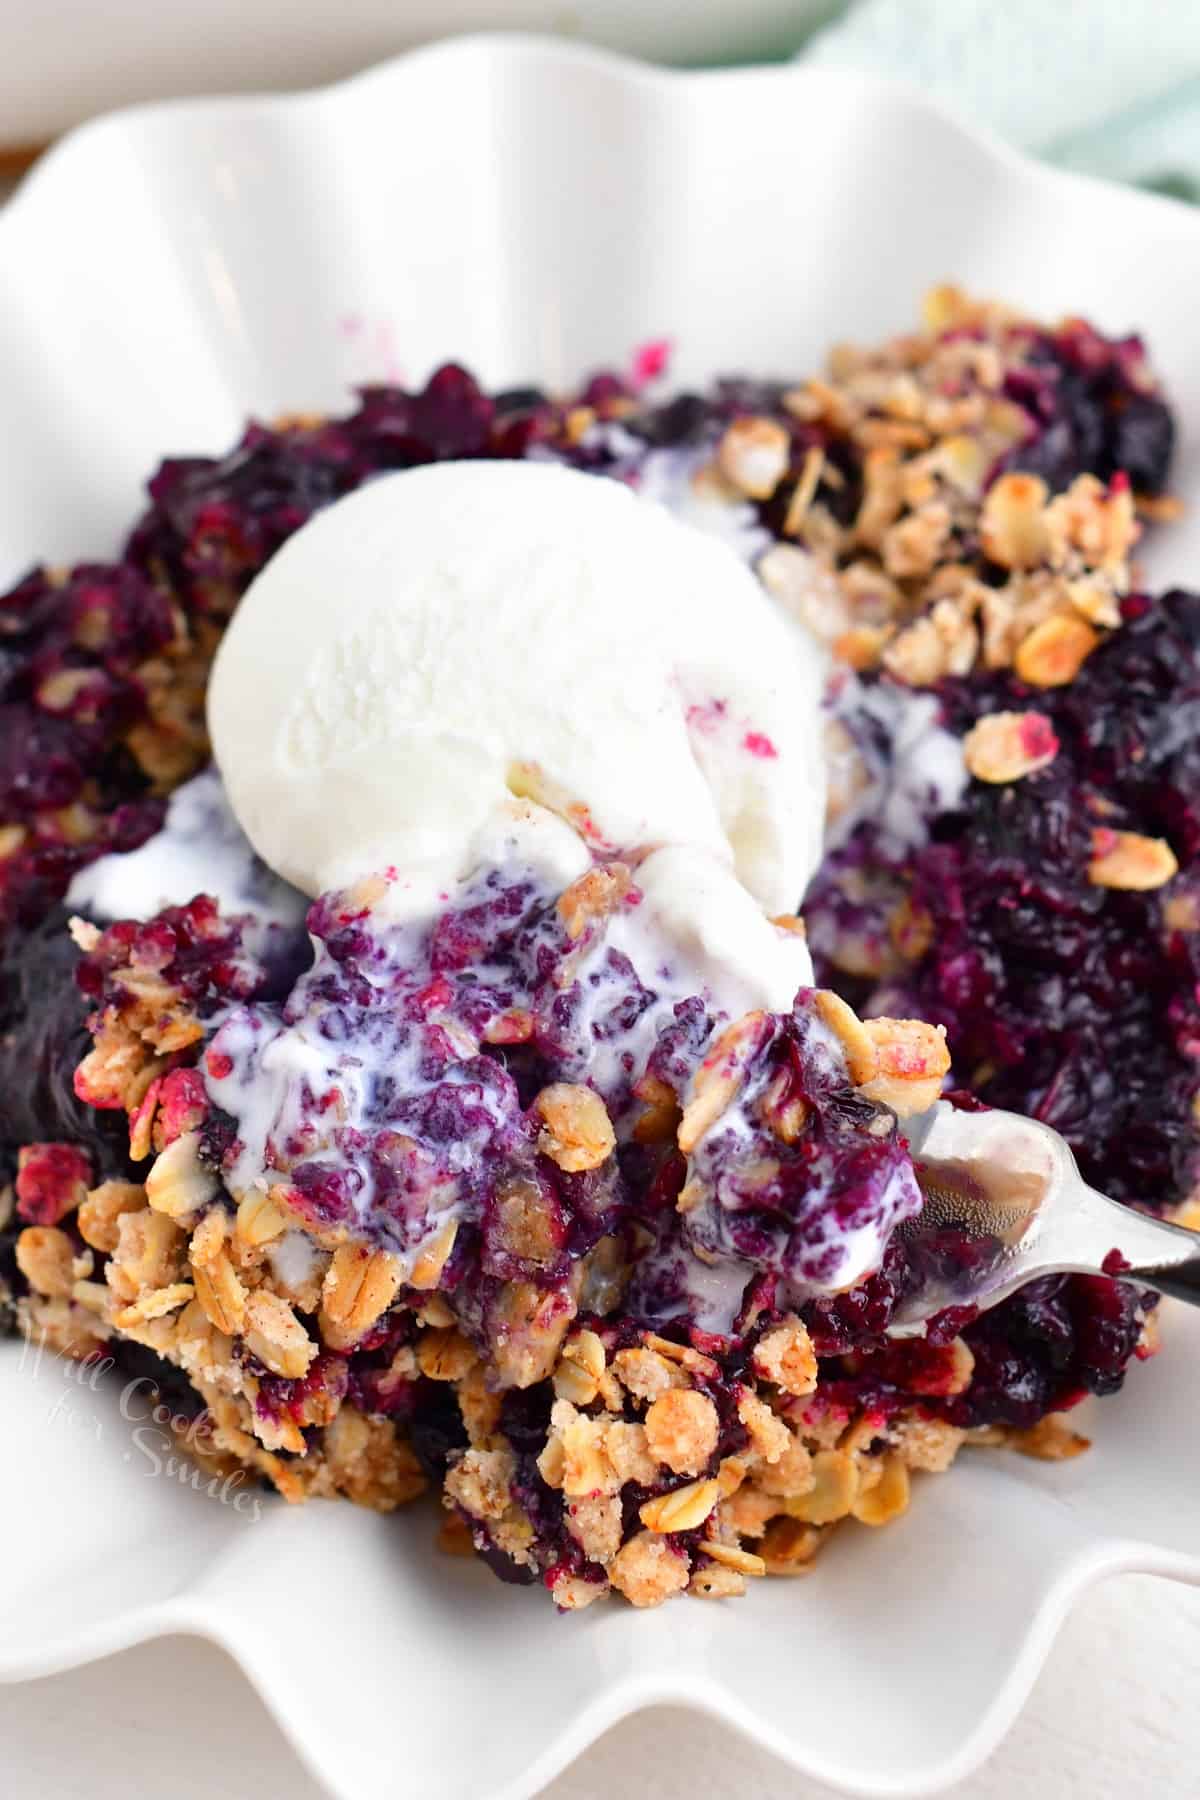 Ice cream is melting into a warm serving of blueberry crisp.